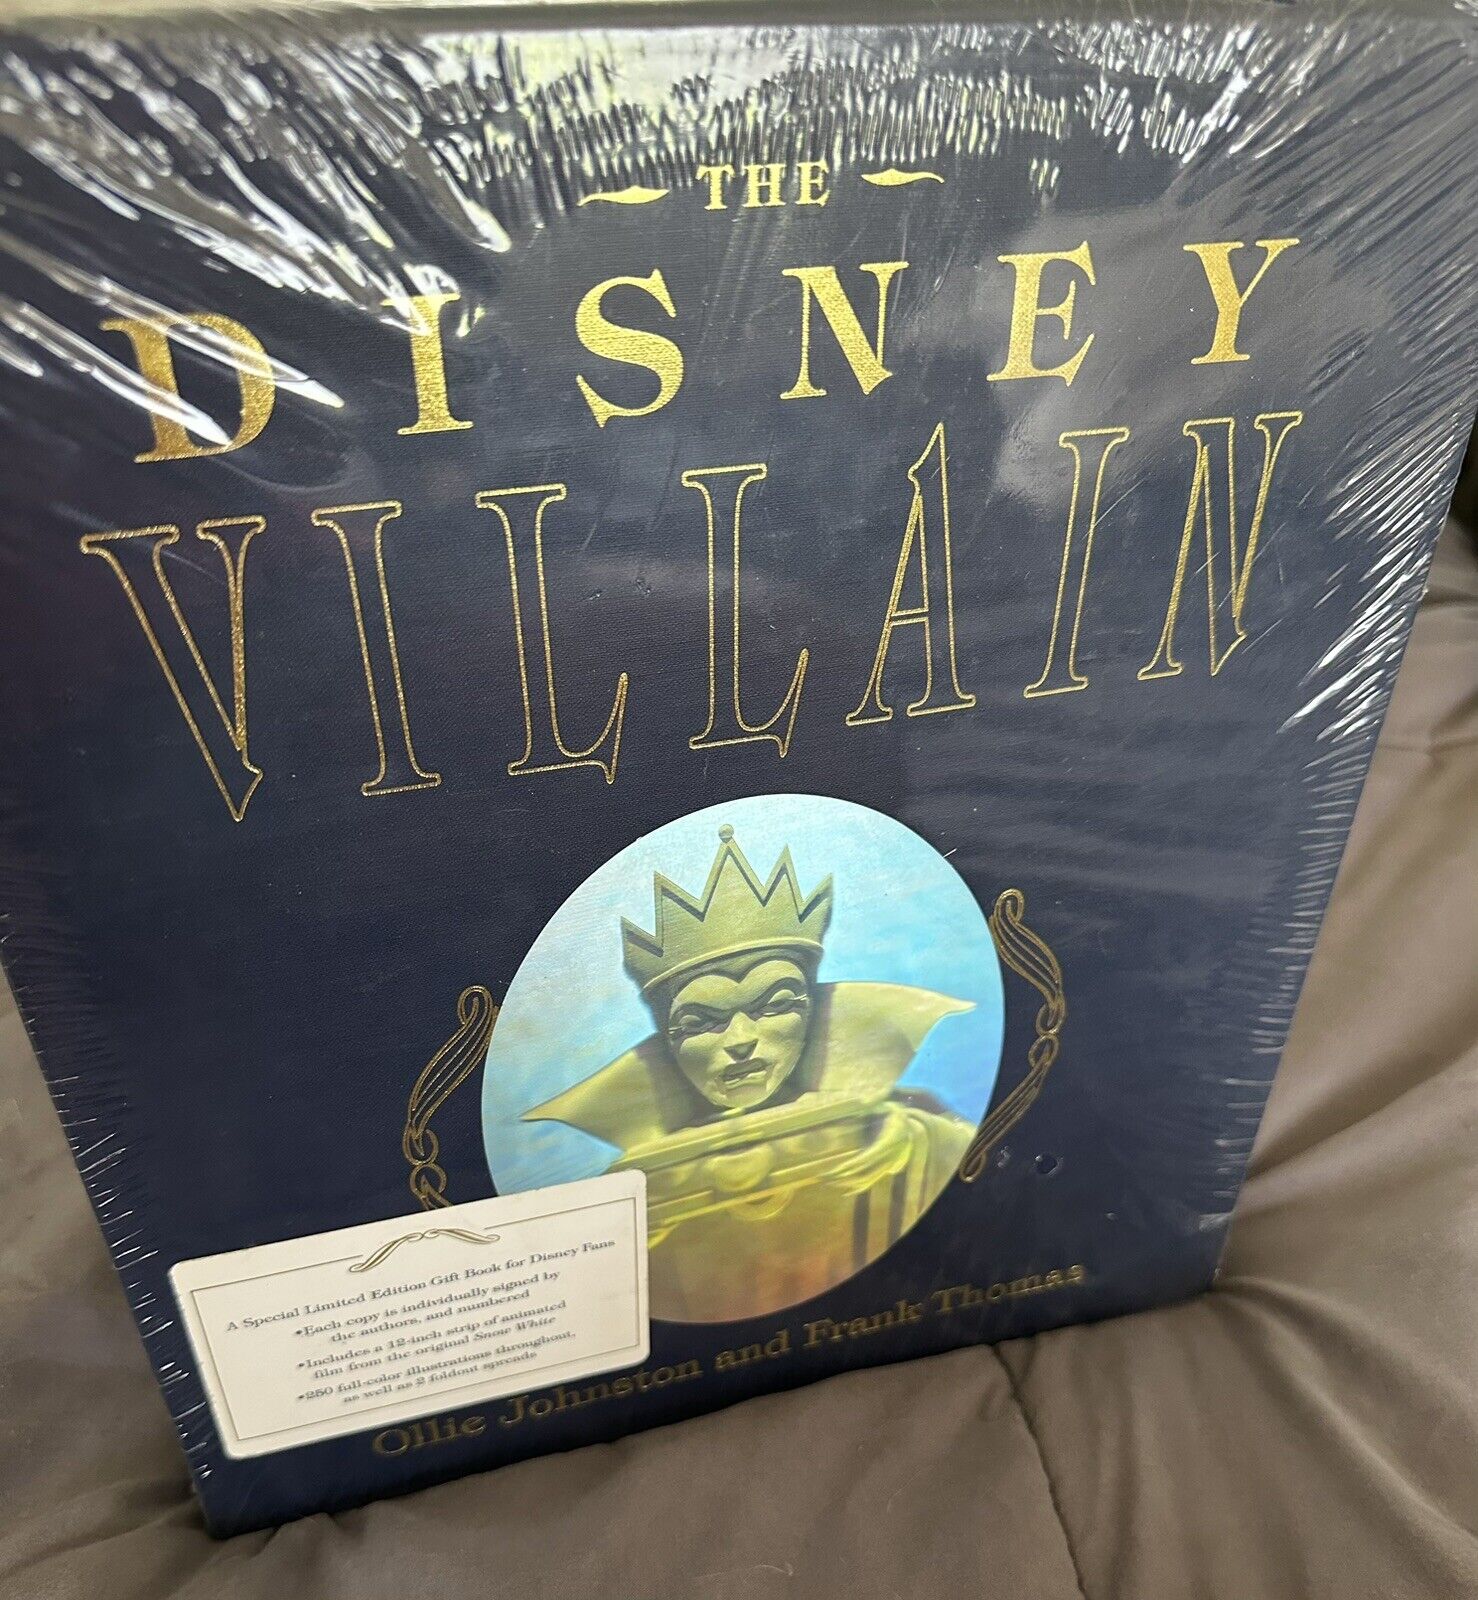 The Disney Villain Limited Edition Signed Ollie Johnson And Frank Thomas Book